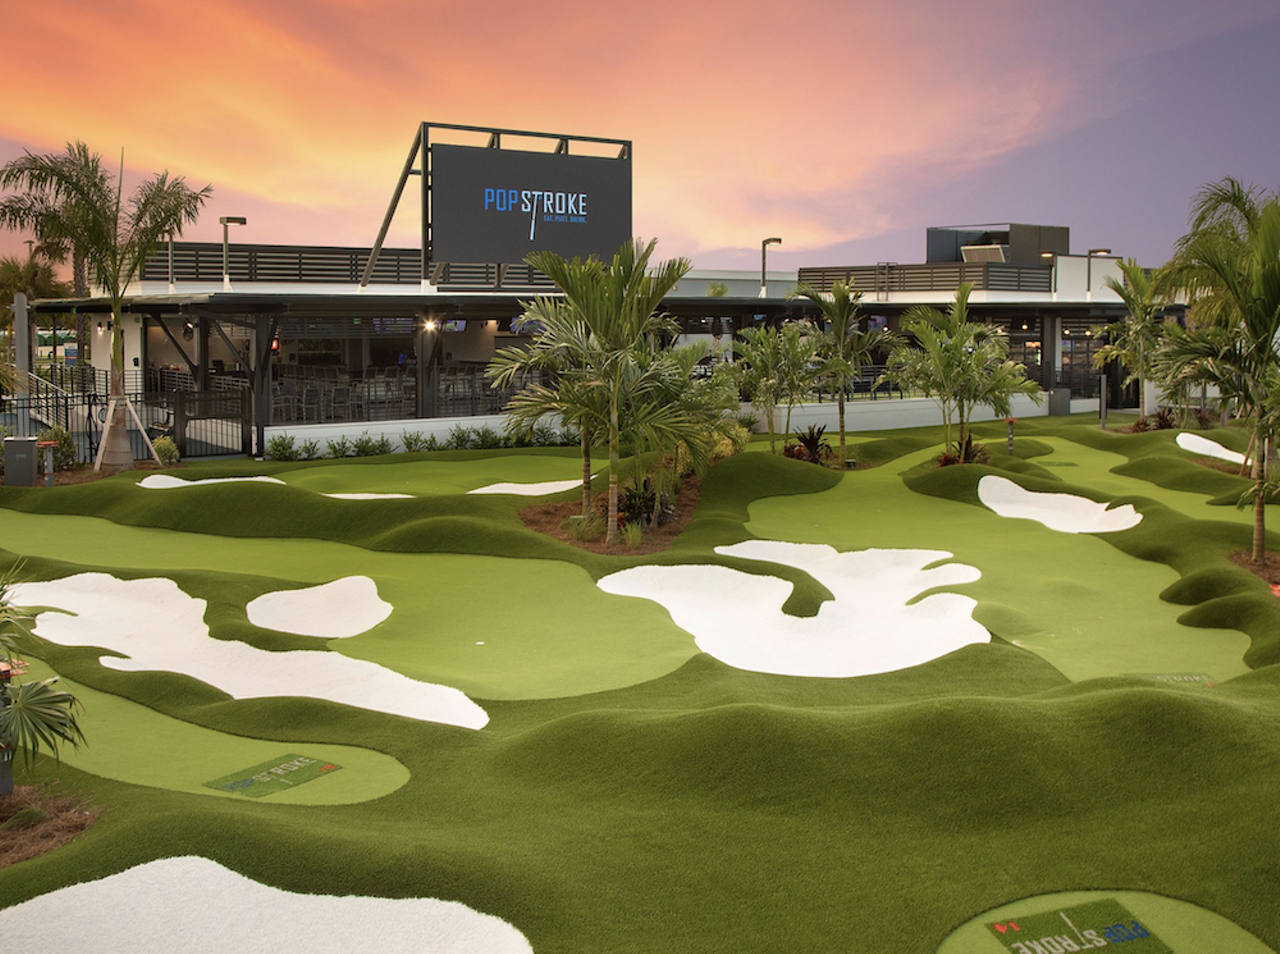 PopStroke
Wesley Chapel and Sarasota
A golf-centric casual dining concept co-owned by Tiger Woods plans to open this spring in Wesley Chapel and Sarasota in spring. Includes a 36-hole professionally-manicured putting facility, dining area and outdoor playground complete with games like ping-pong and cornhole.